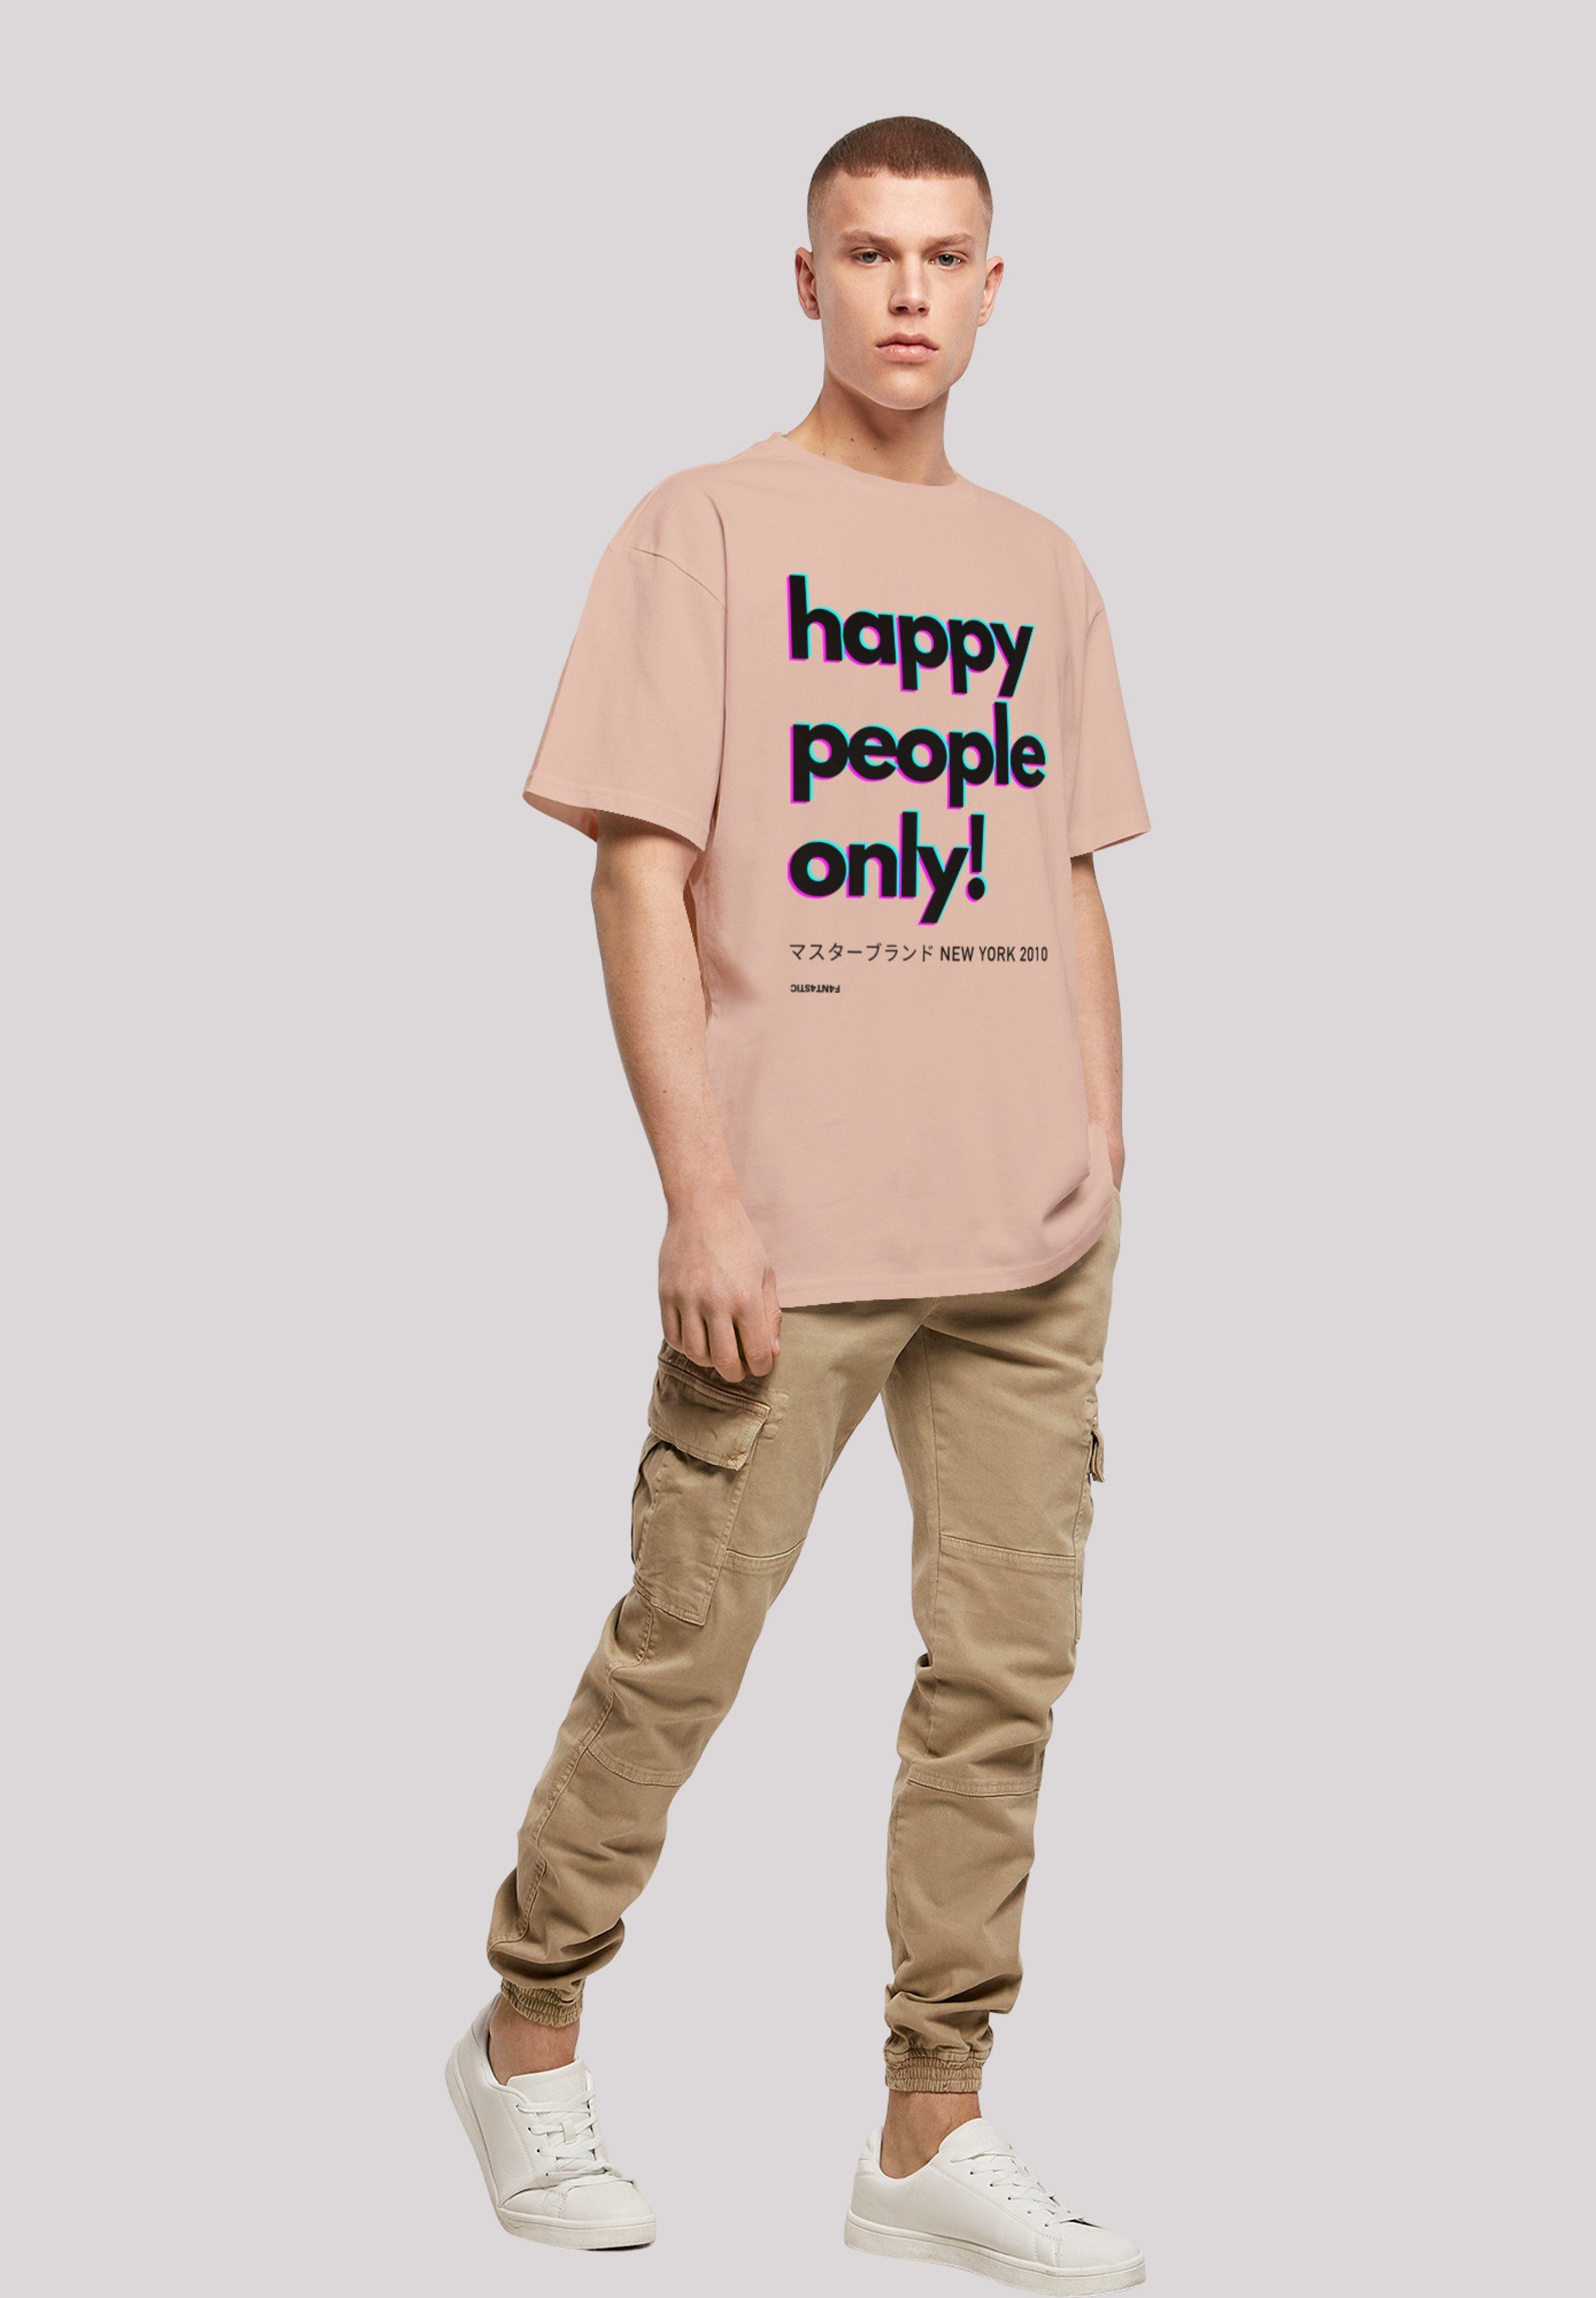 New York people Print T-Shirt amber Happy F4NT4STIC only